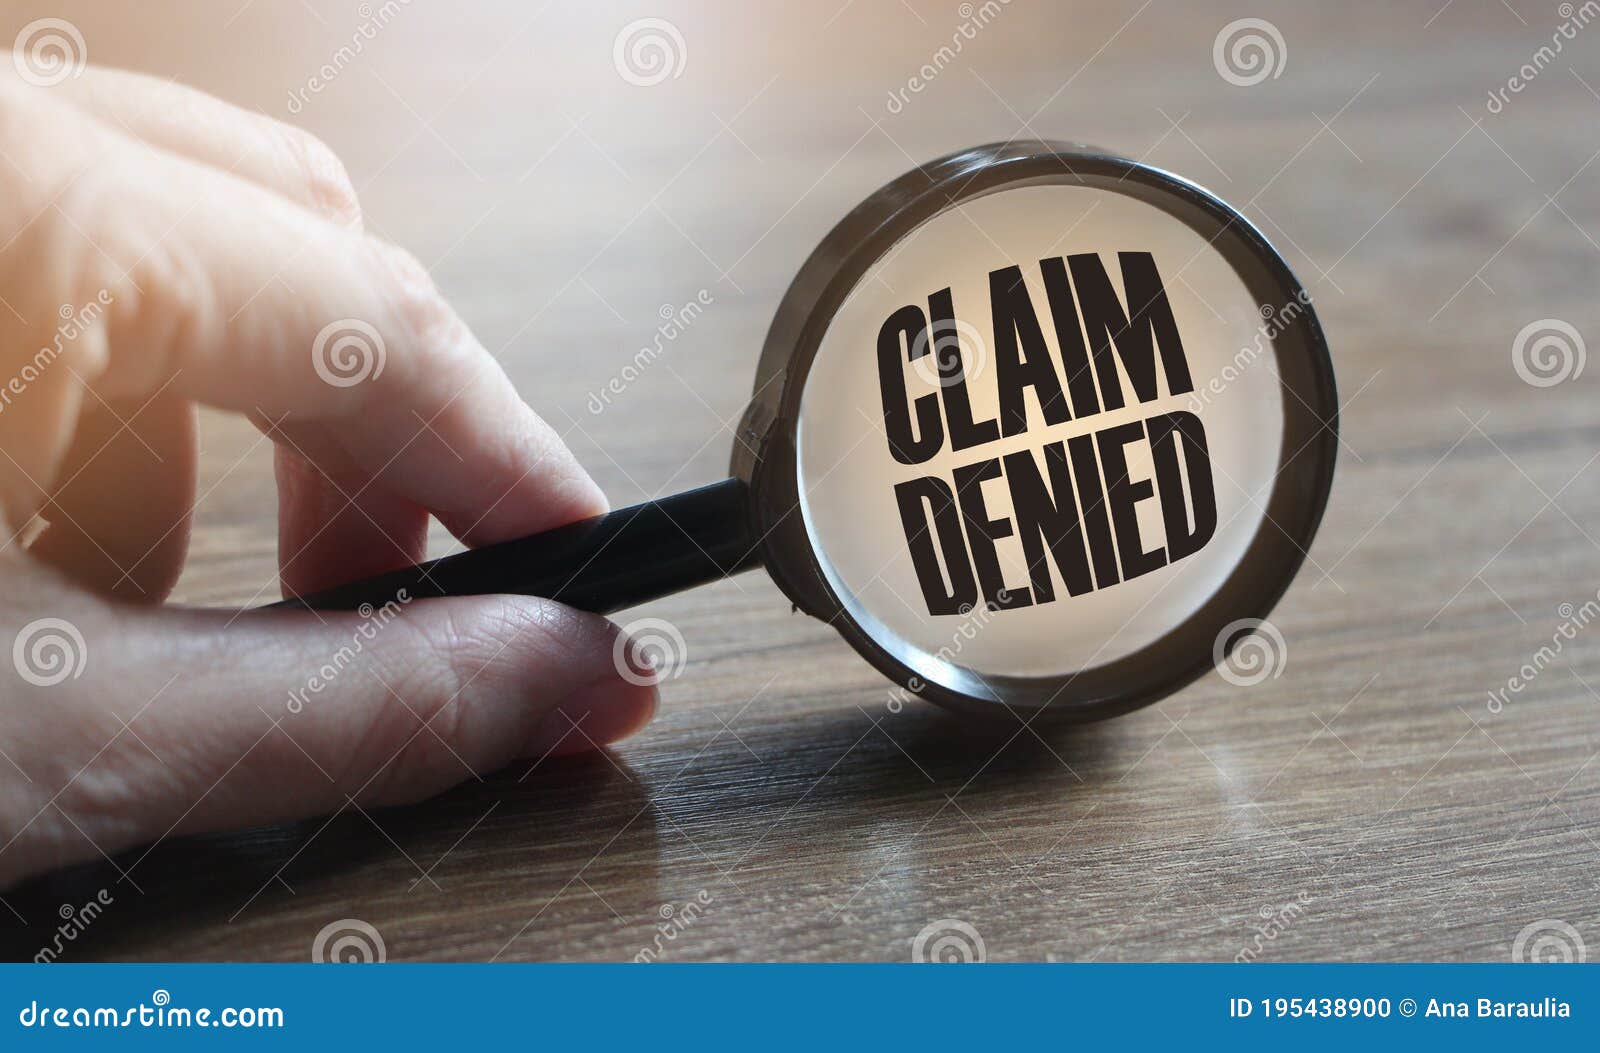 claim denied in a magnifying glass on a wooden table. insurance business concept